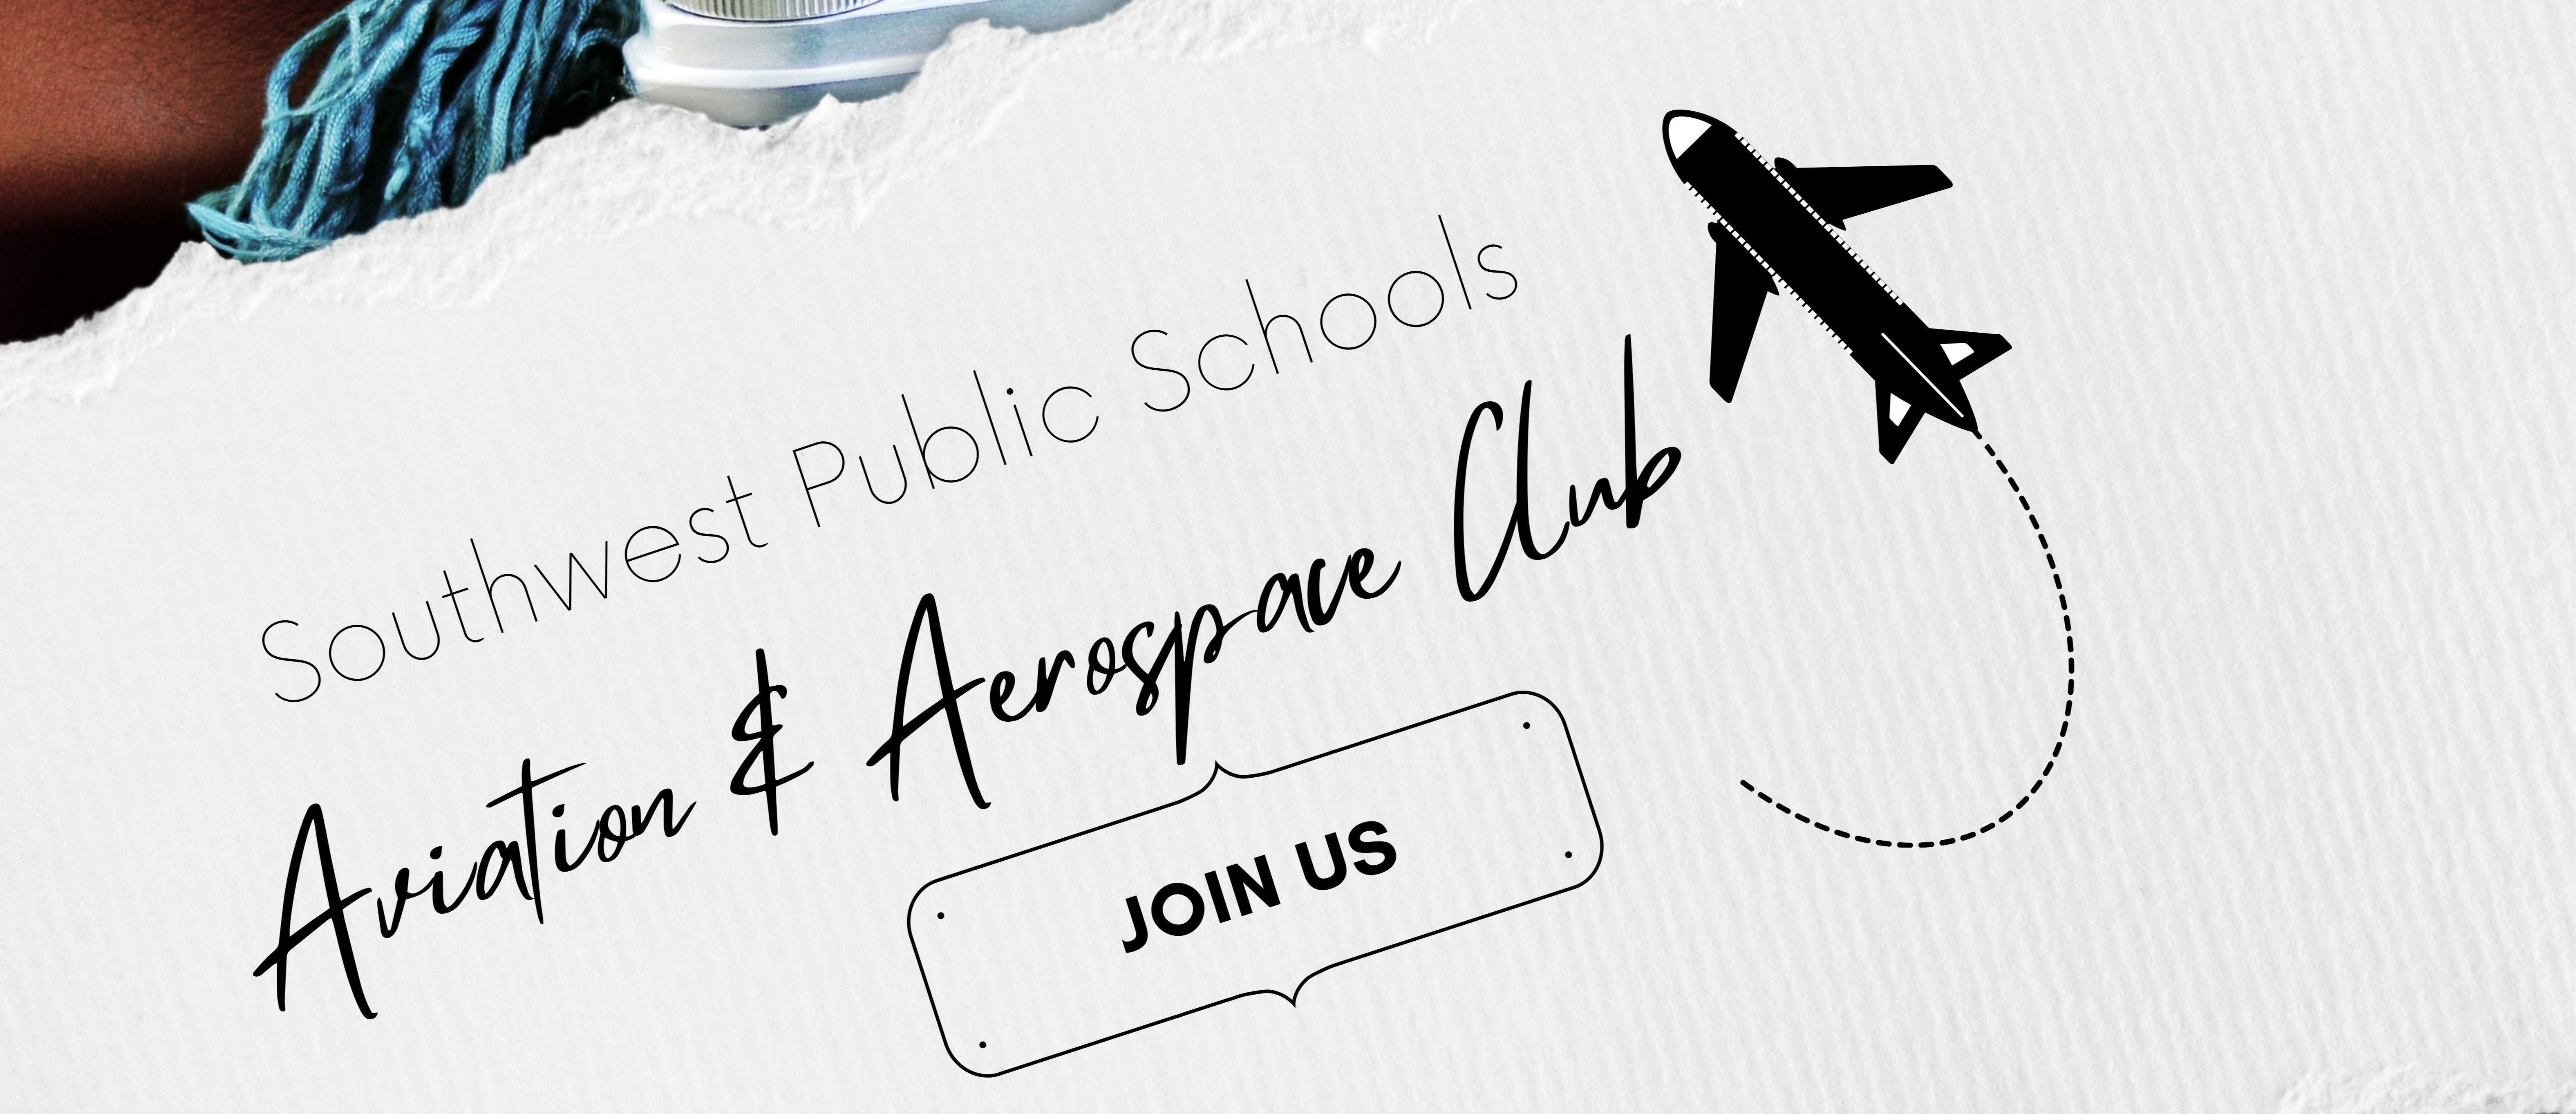 Aviation Club - Join Us